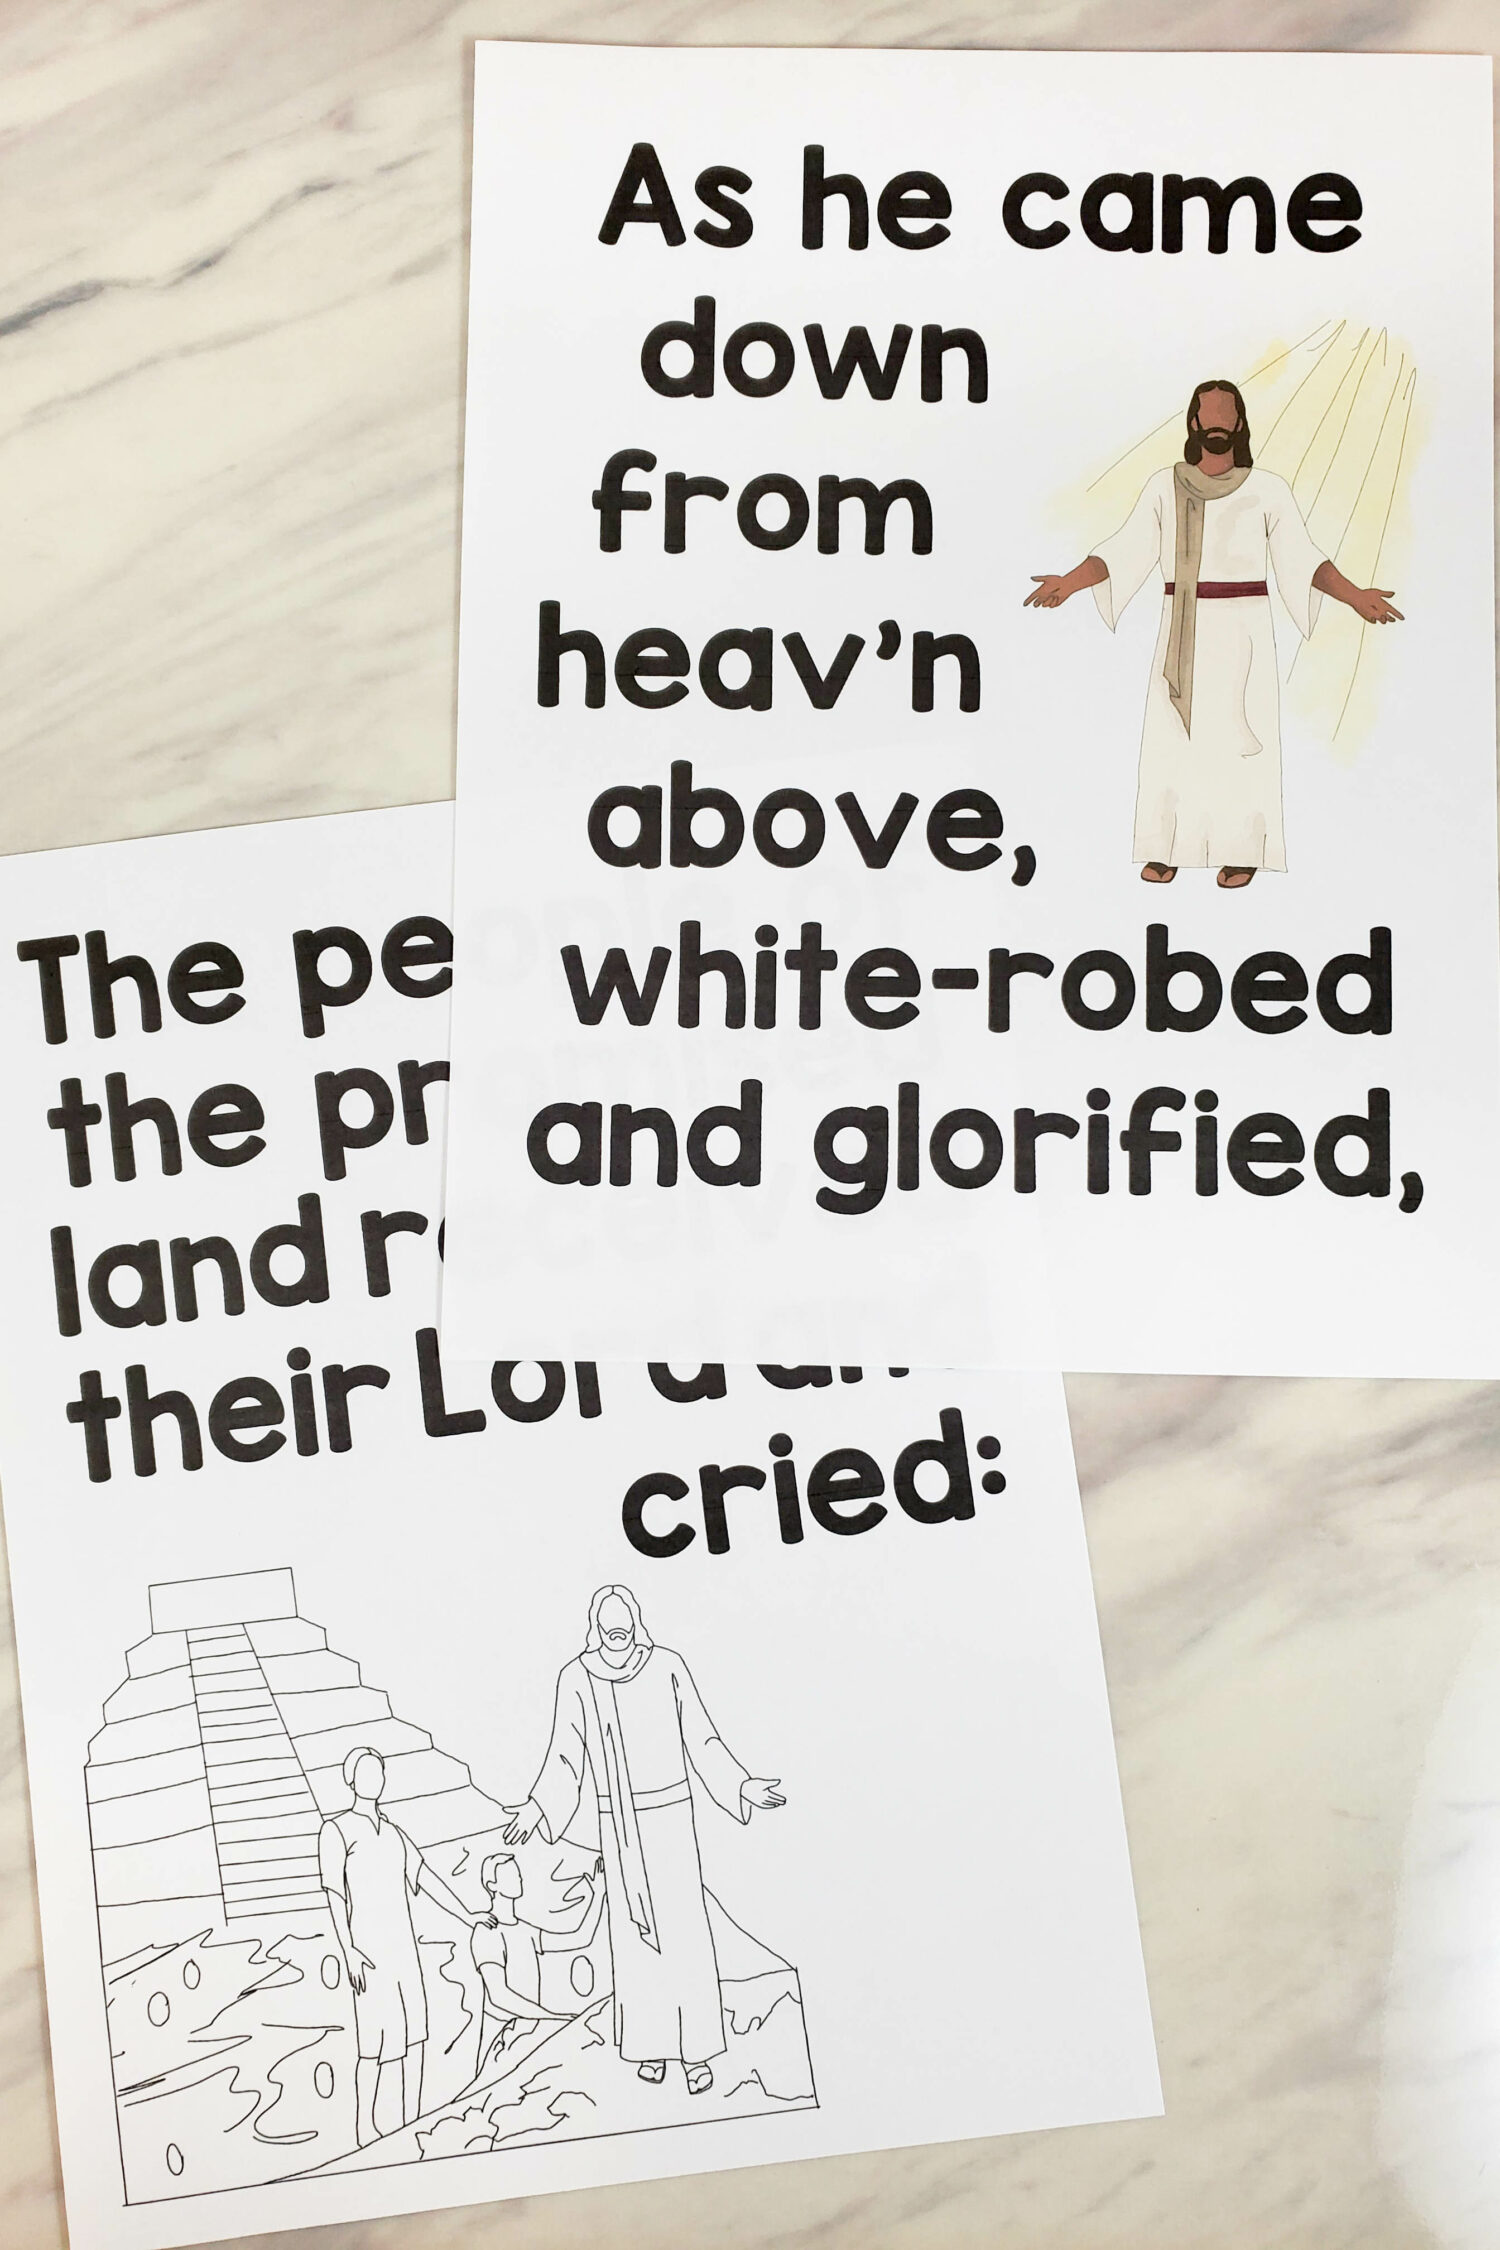 Easter Hosanna Flip Chart singing time visual aids helps for LDS Primary music leaders to teach this beautiful song for Easter or any time of the year. Part of the Book of Mormon Come Follow Me study song list.